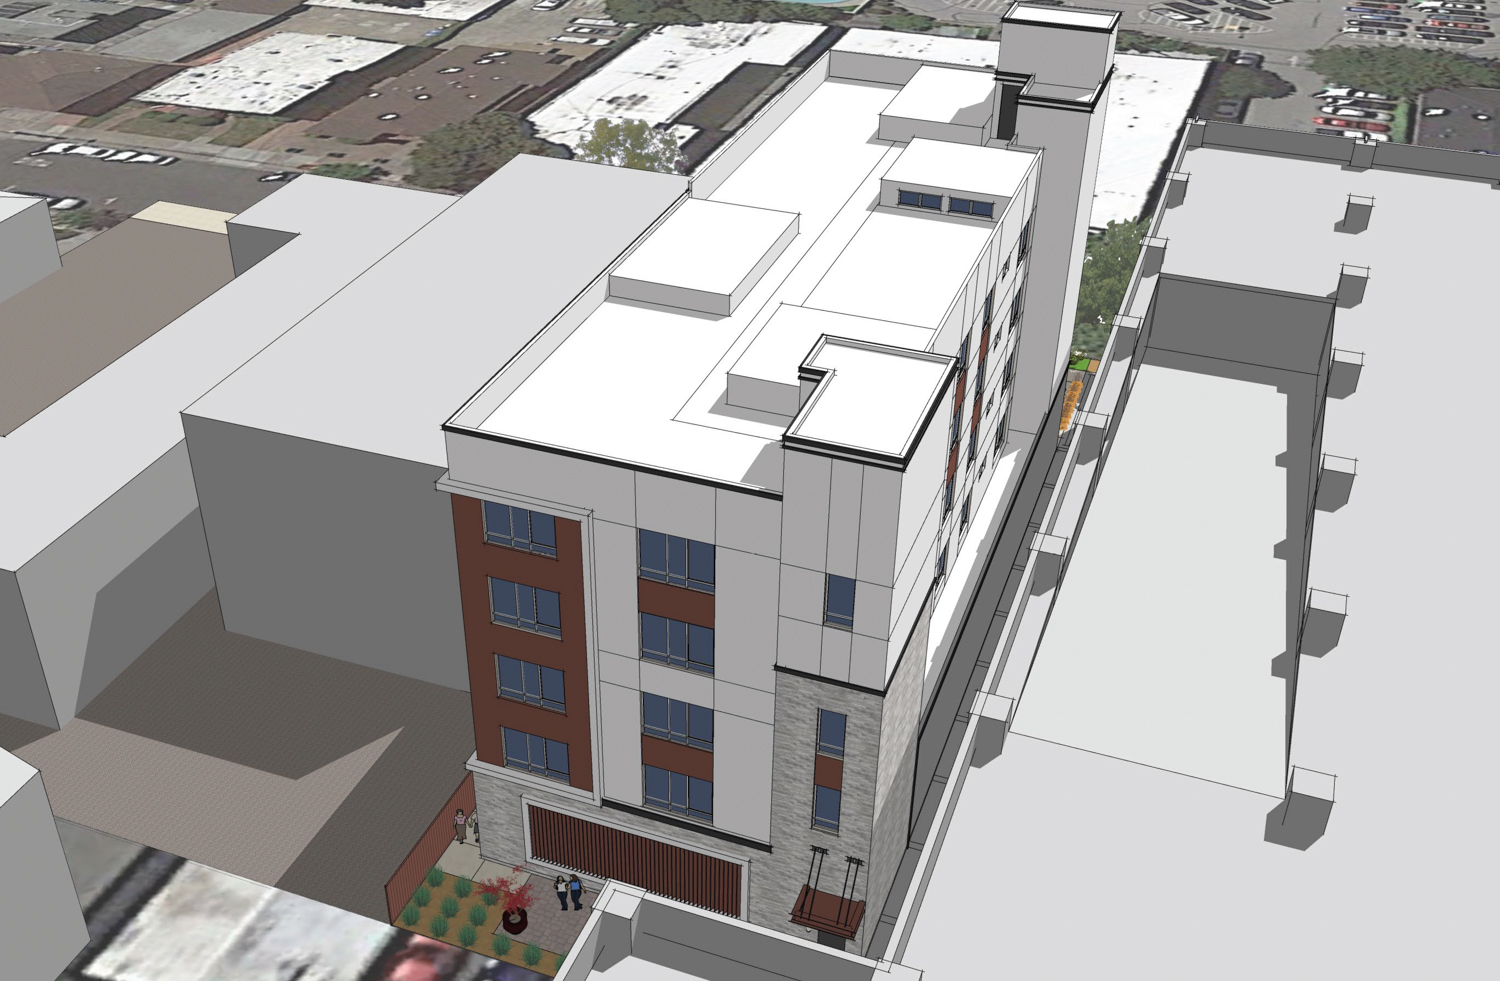 128 Lorton Avenue aerial view, rendering by WHA